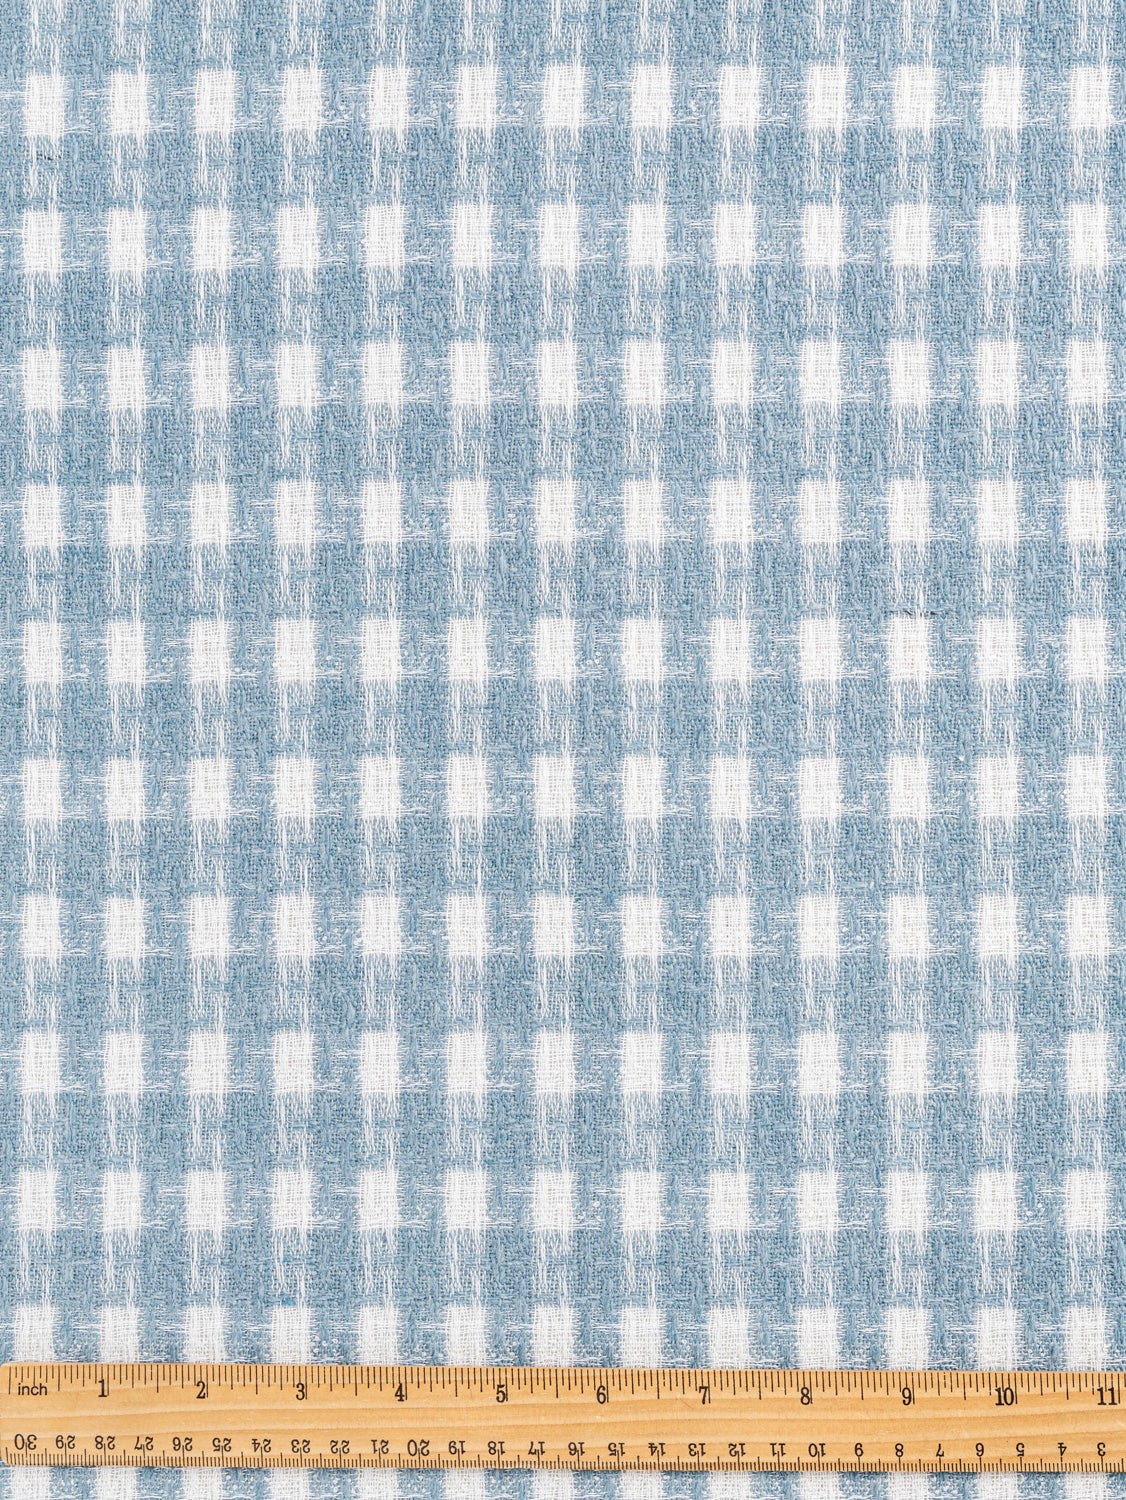 Plaid Wool Coating Deadstock - Light Blue + White - Swatch